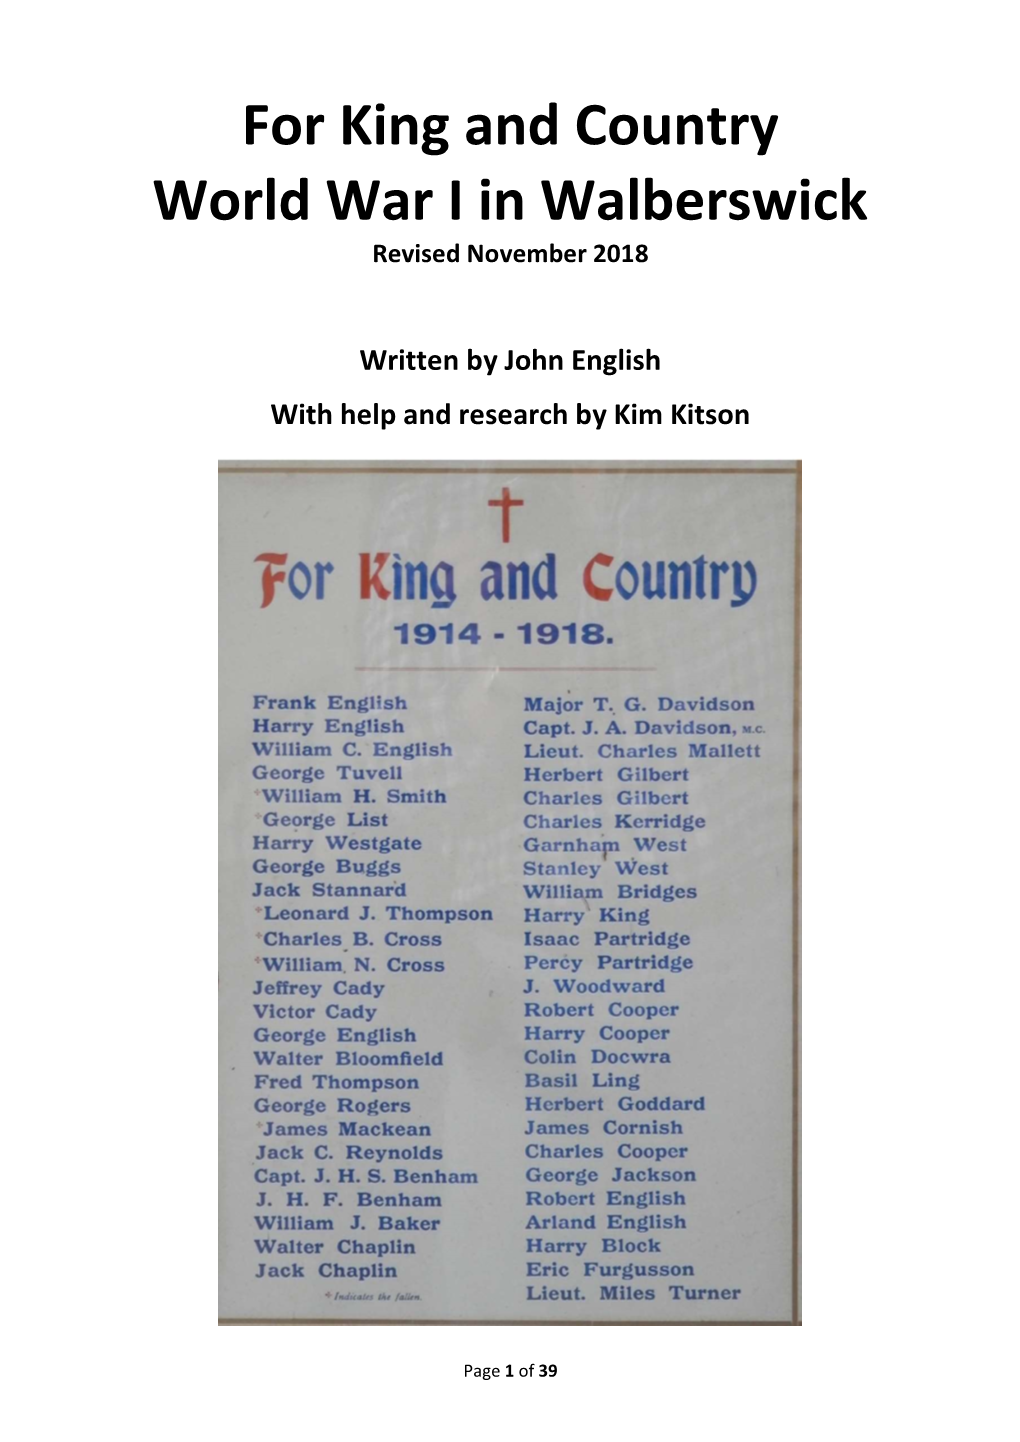 For King and Country World War I in Walberswick Revised November 2018